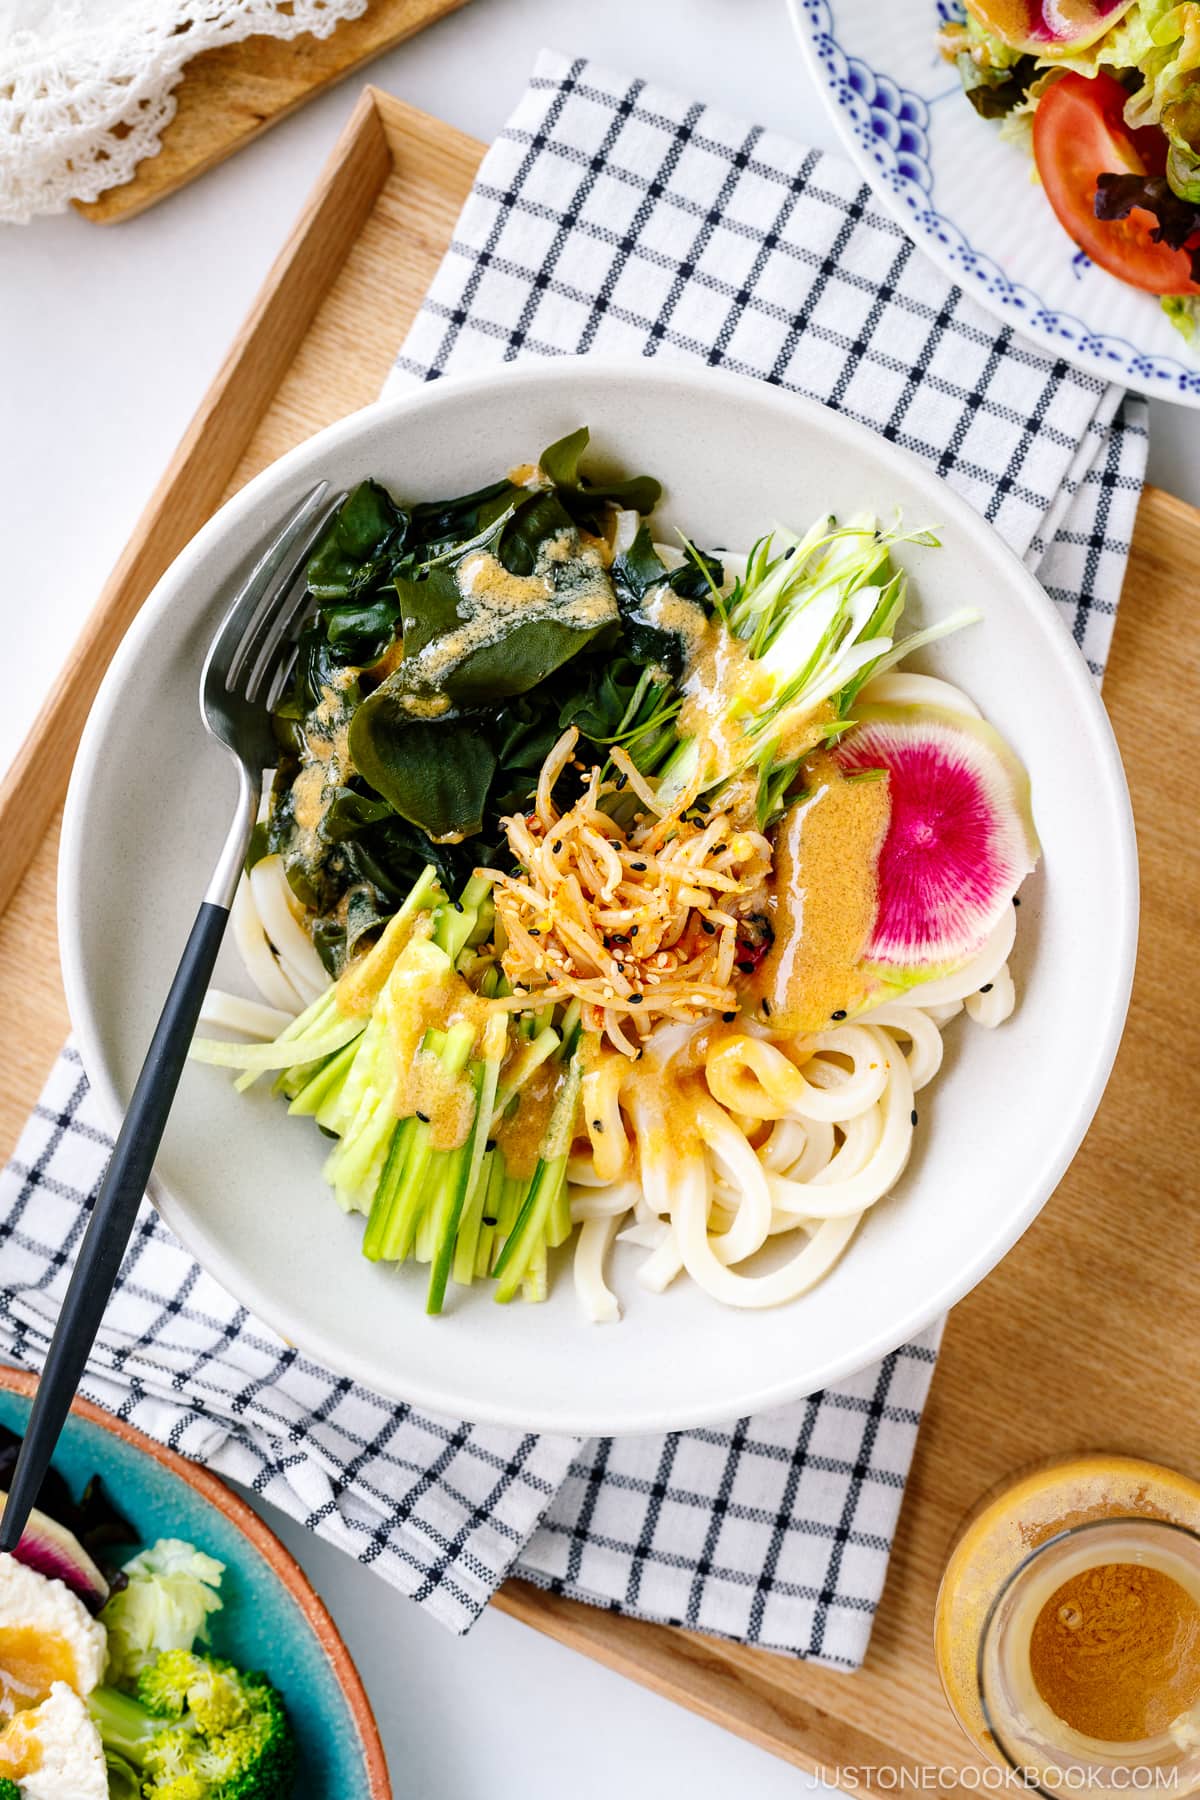 A ceramic plate containing udon noodles, wakame seaweed, and julienned cucumber topped with homemade Miso Dressing.